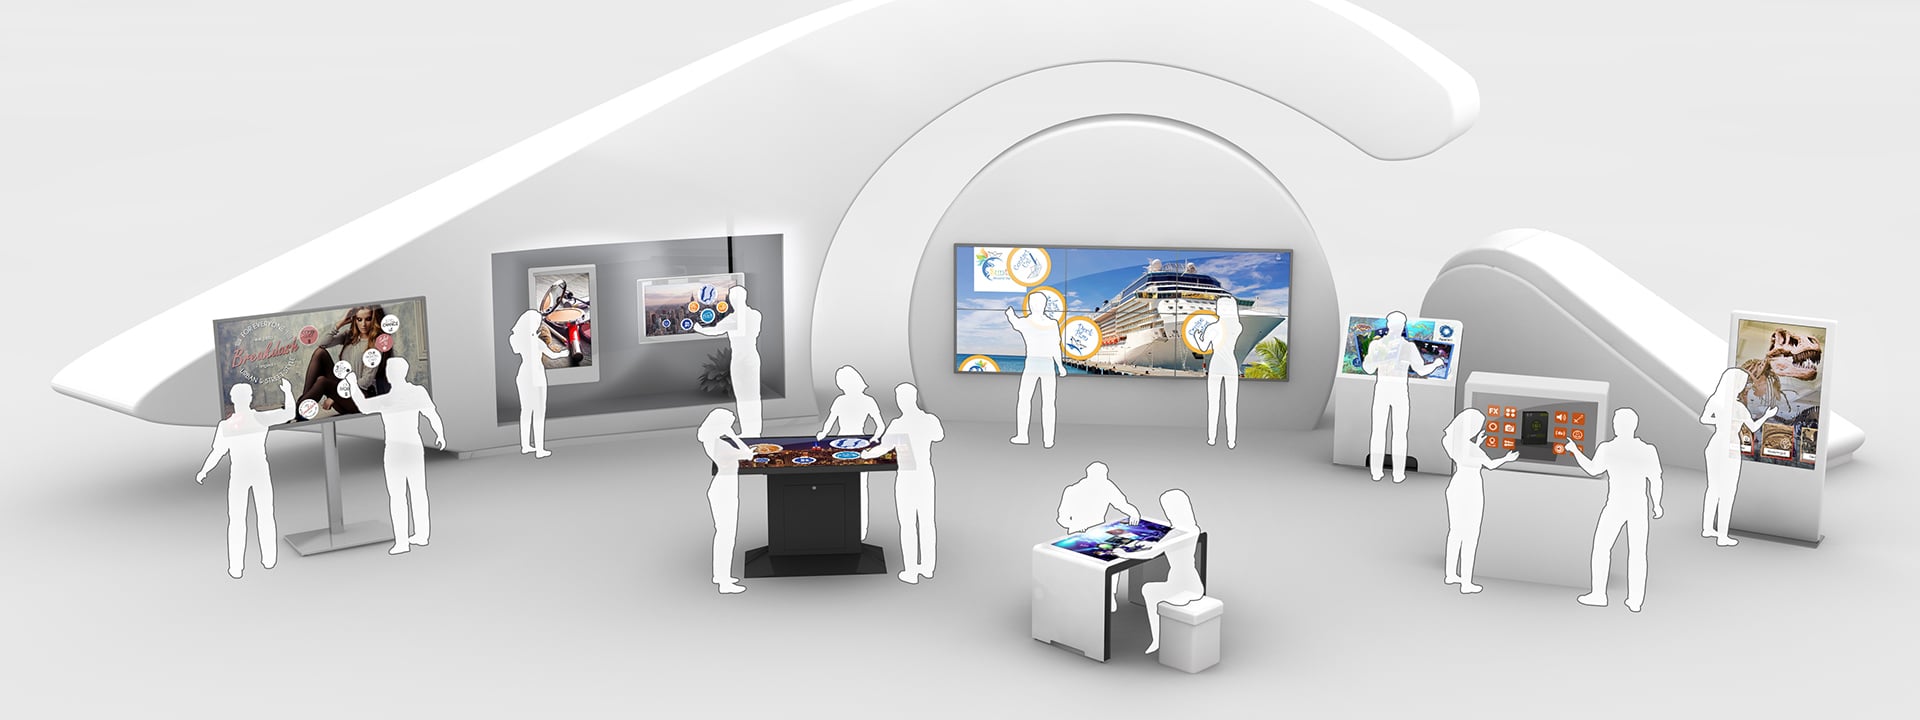 Multi touch screen software for Hotels & Spa